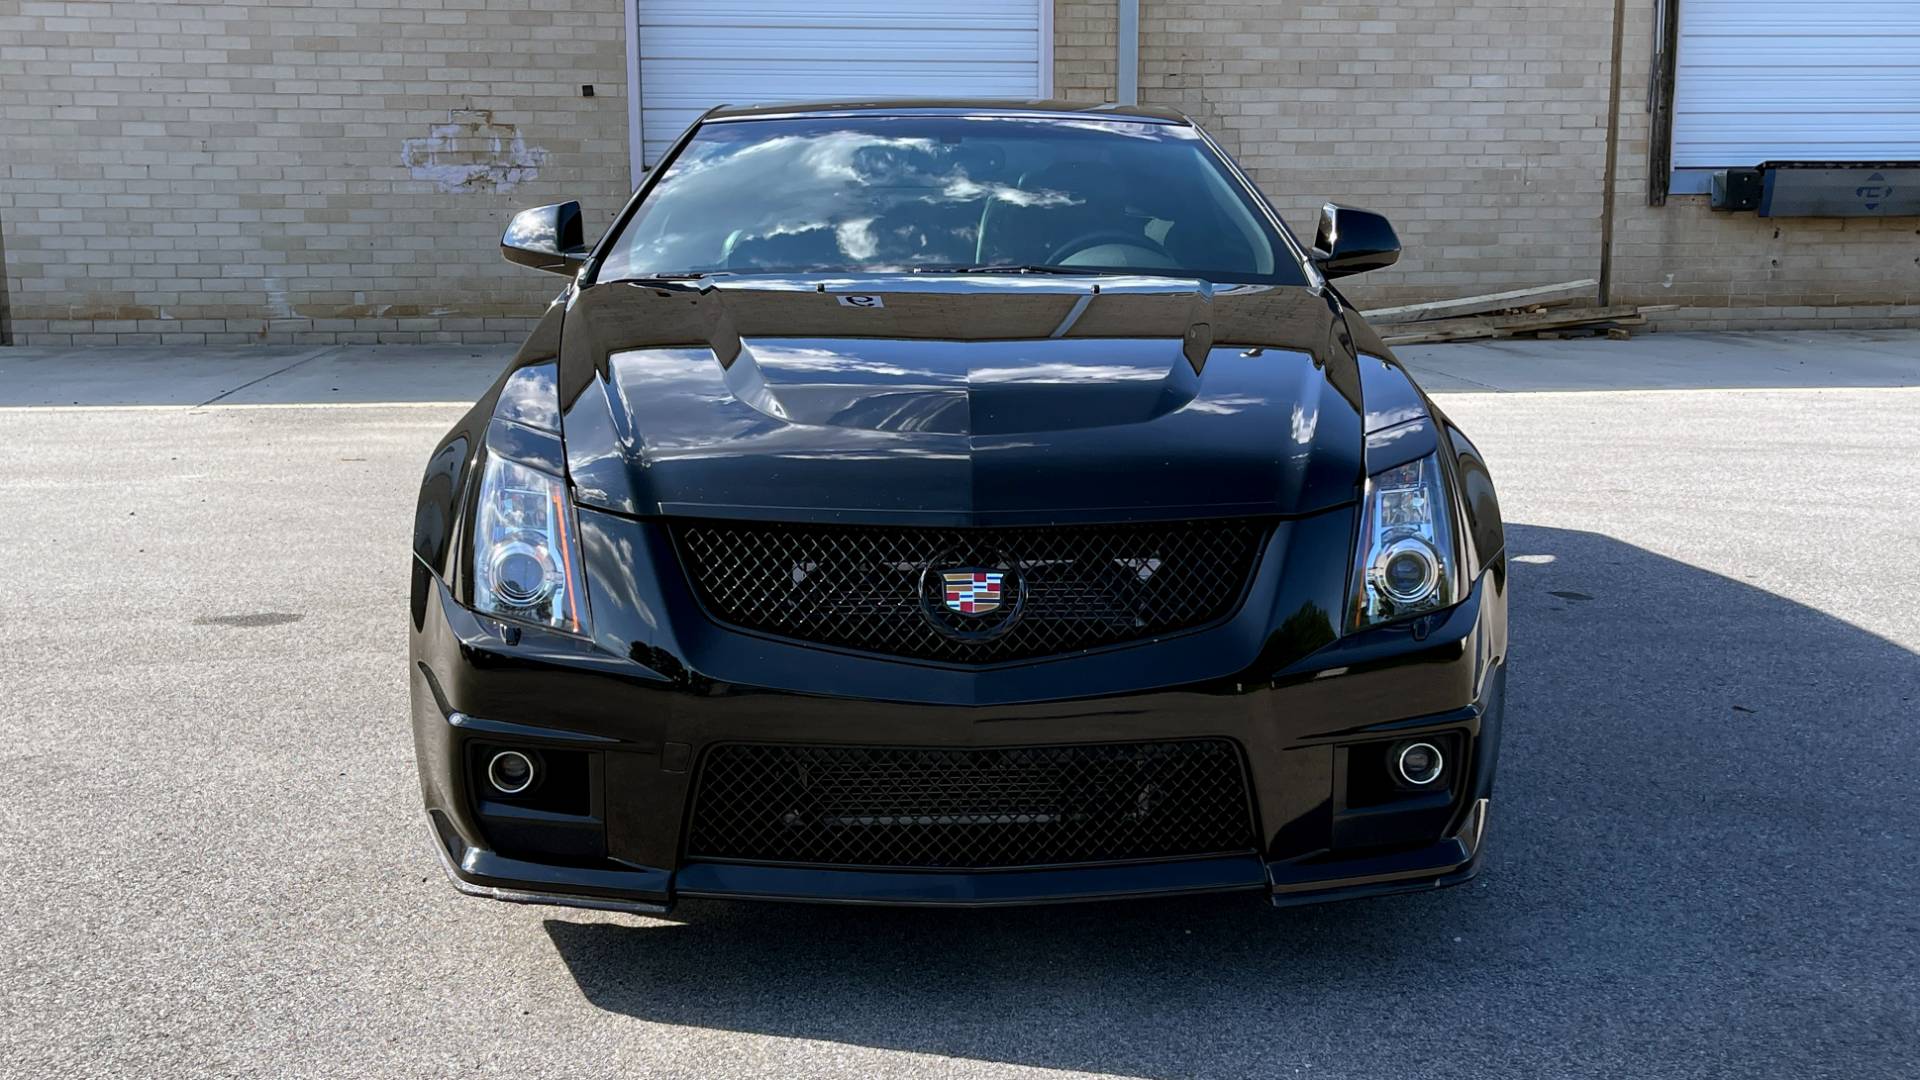 Used 2011 Cadillac CTS-V COUPE 6.2L 600HP+ / NAV / BOSE / SUNROOF / RECARO / 19IN WHLS / REARVIEW for sale Sold at Formula Imports in Charlotte NC 28227 7